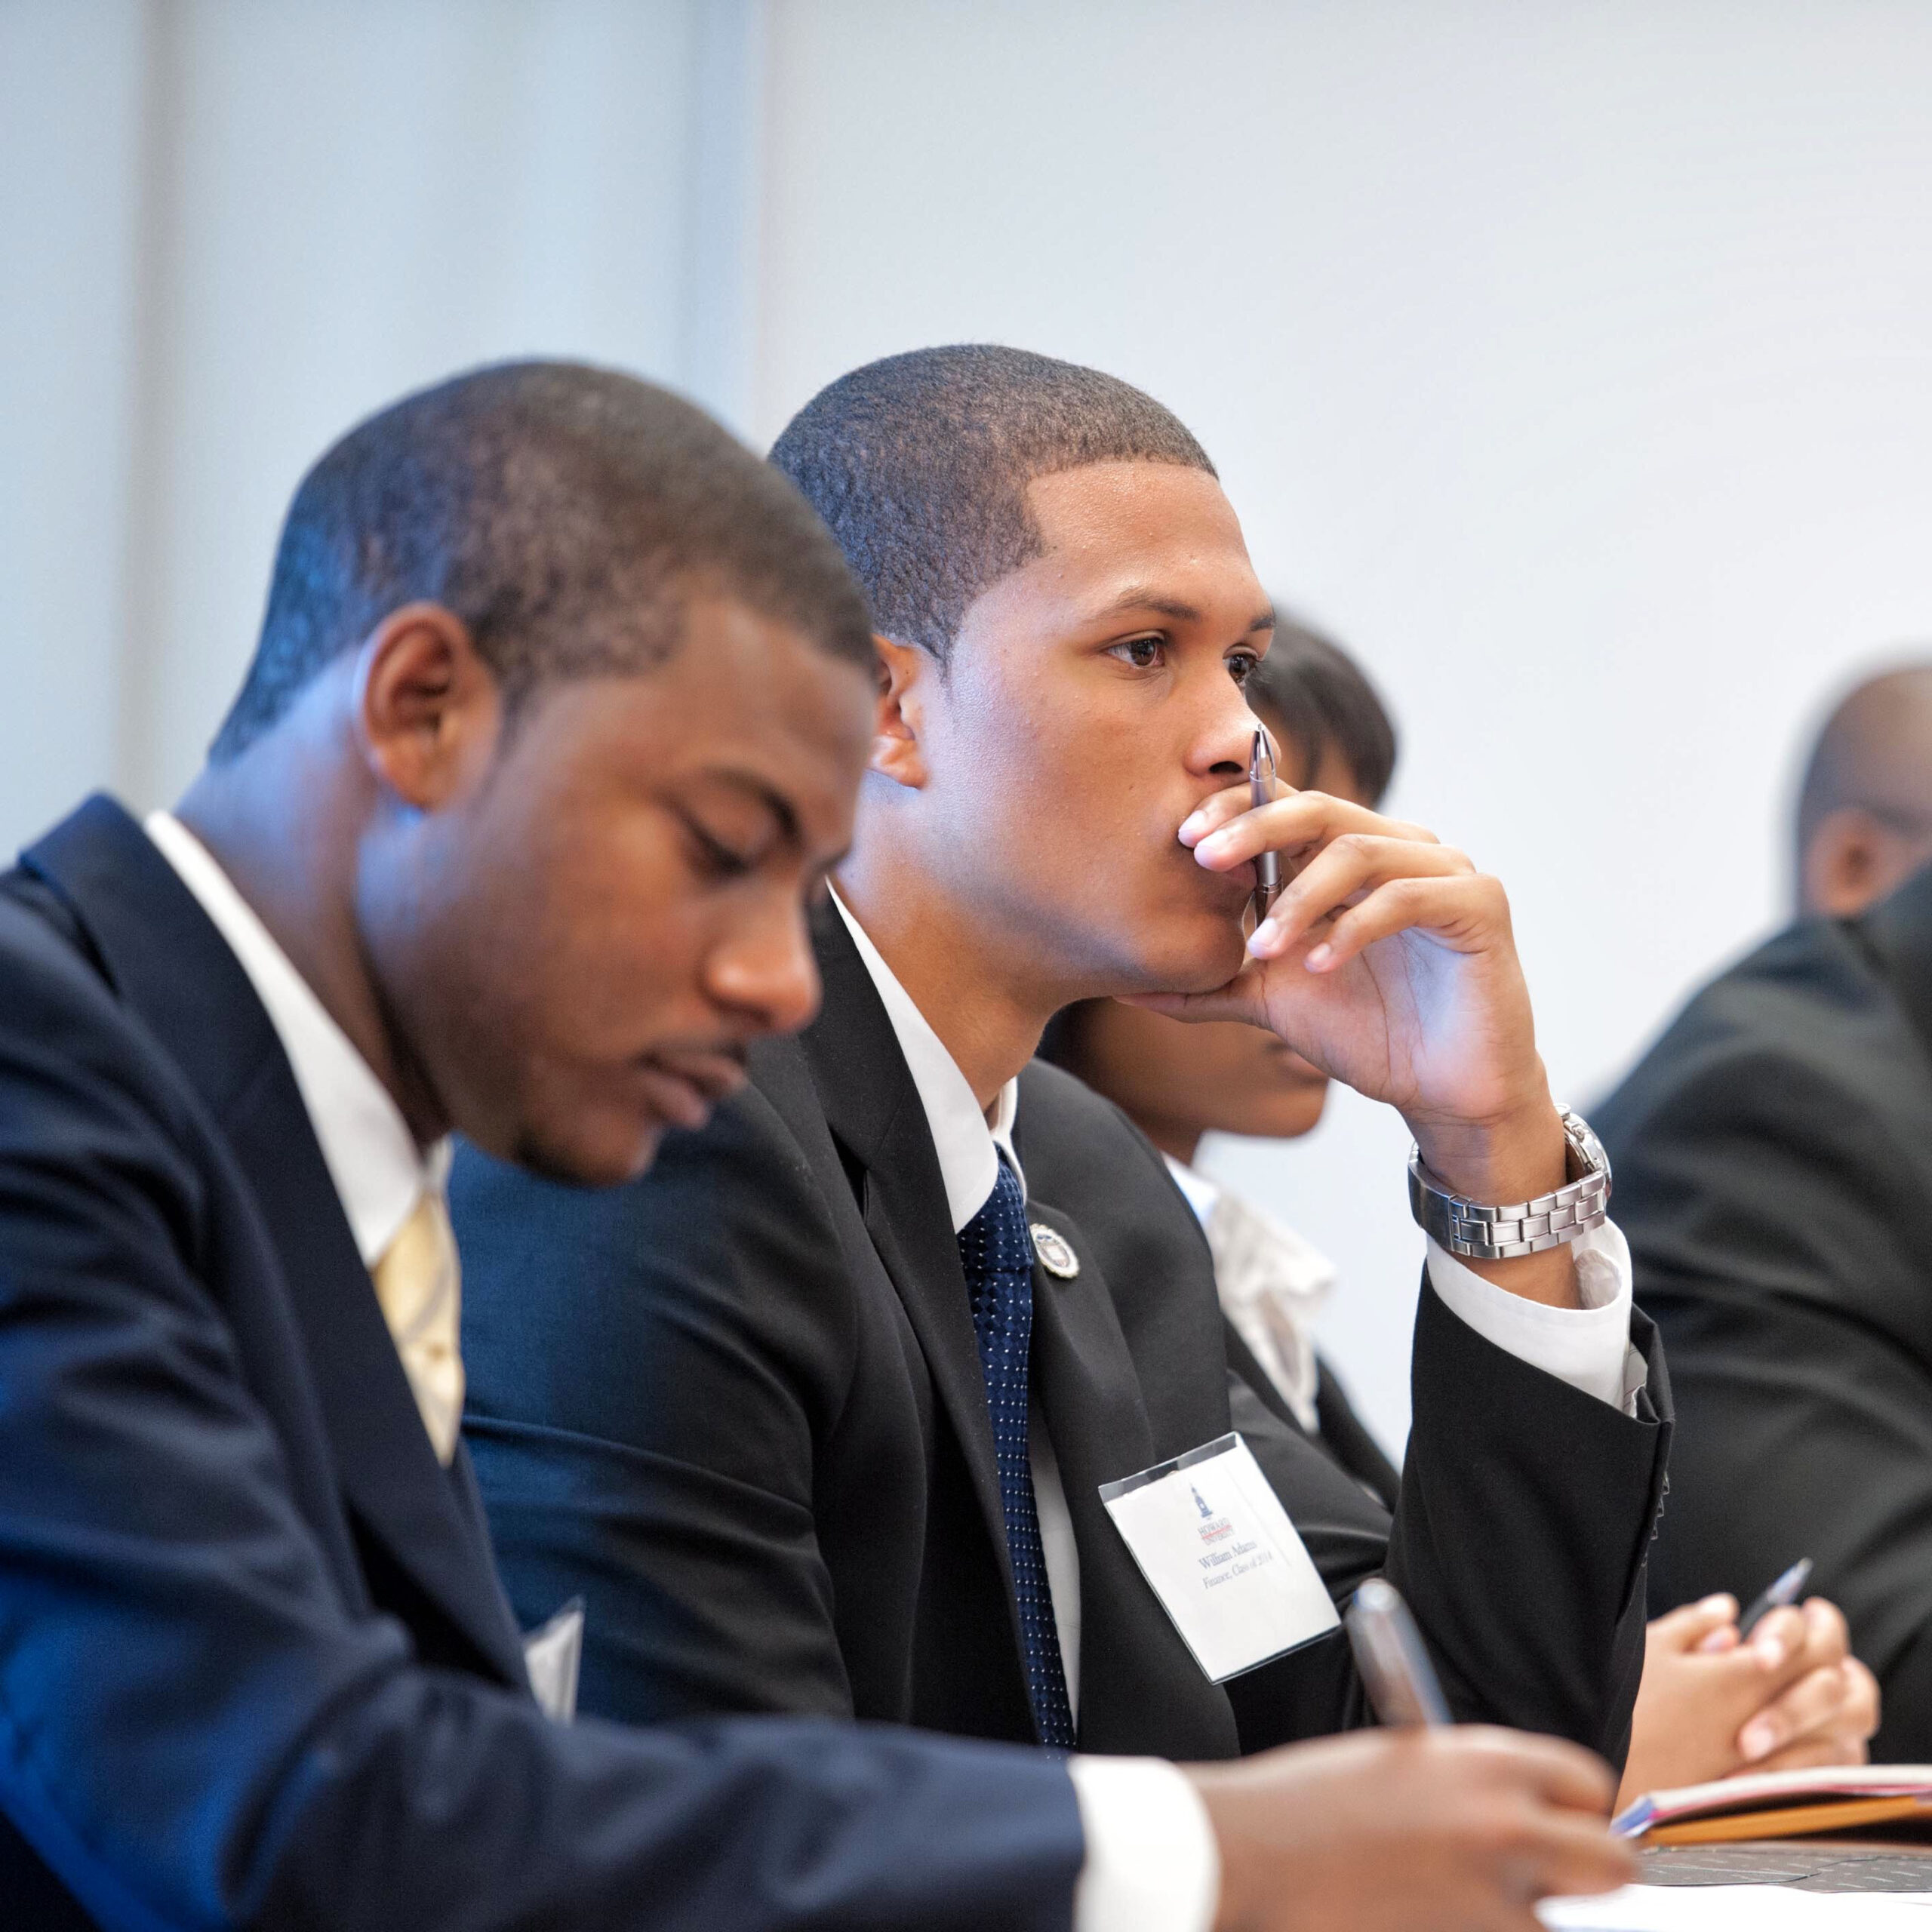 Students in suits sitting at a lecture.